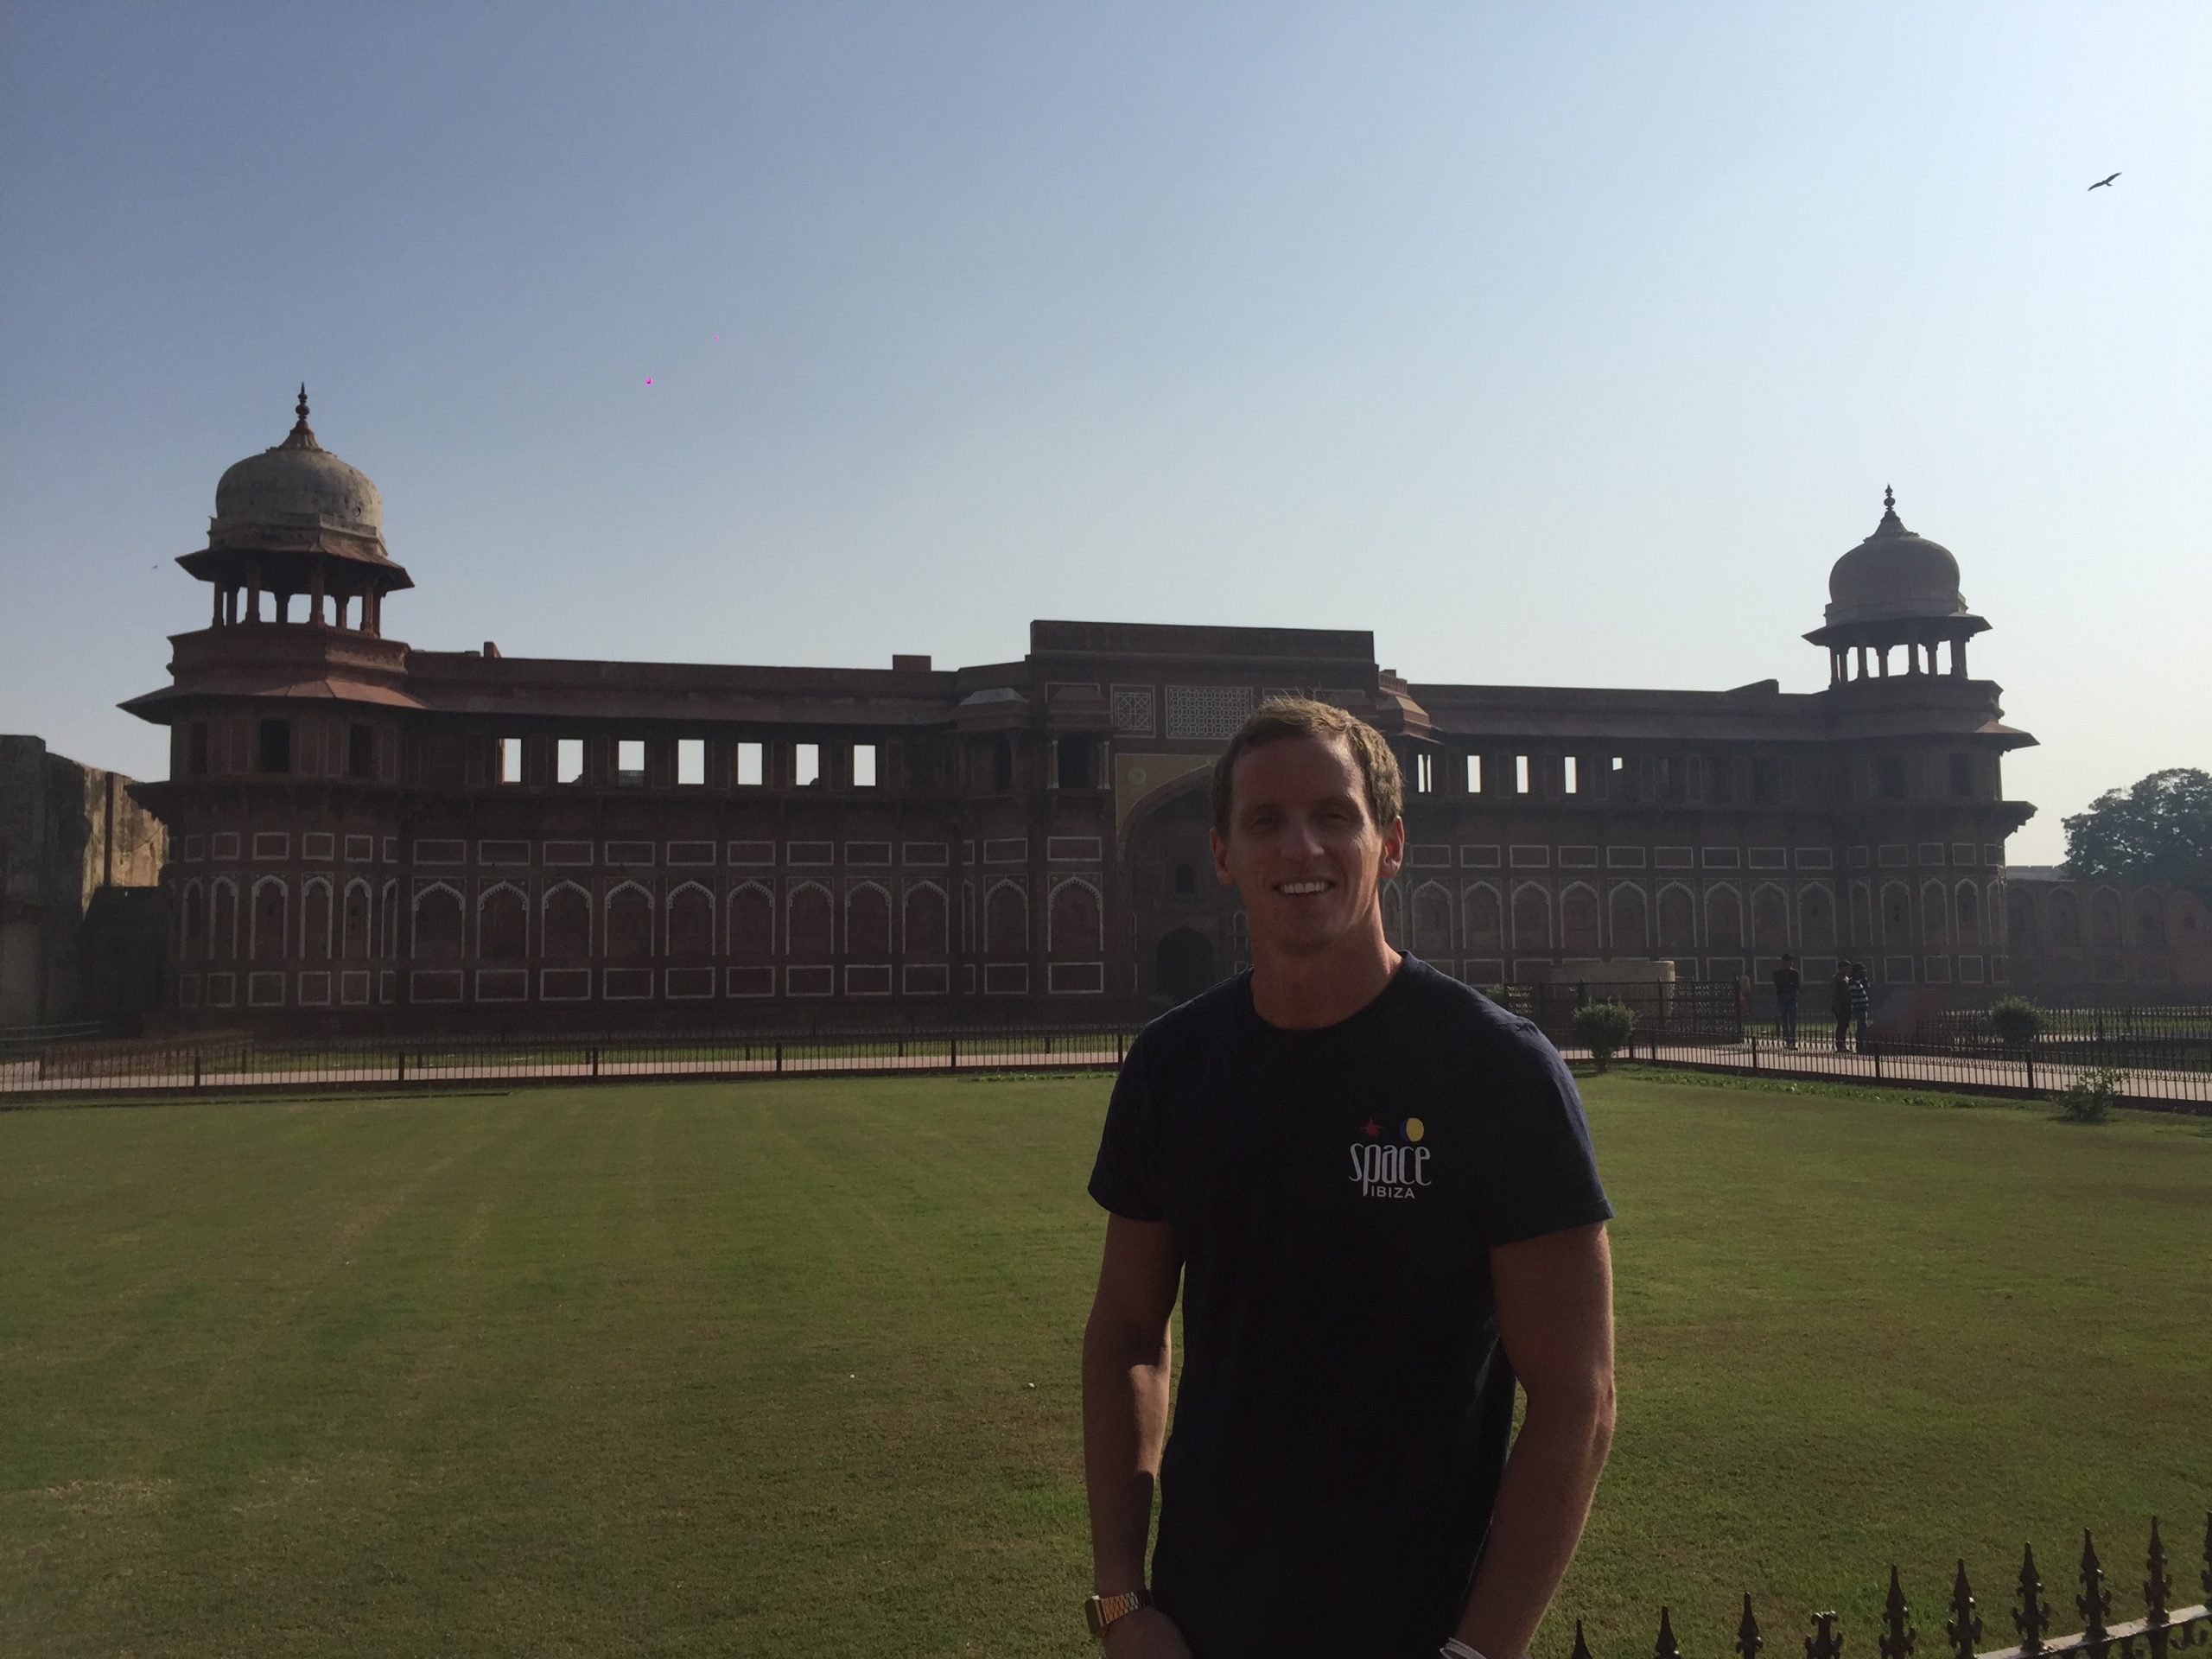 David Simpson and The Agra Fort in India. All alone at the Taj Mahal